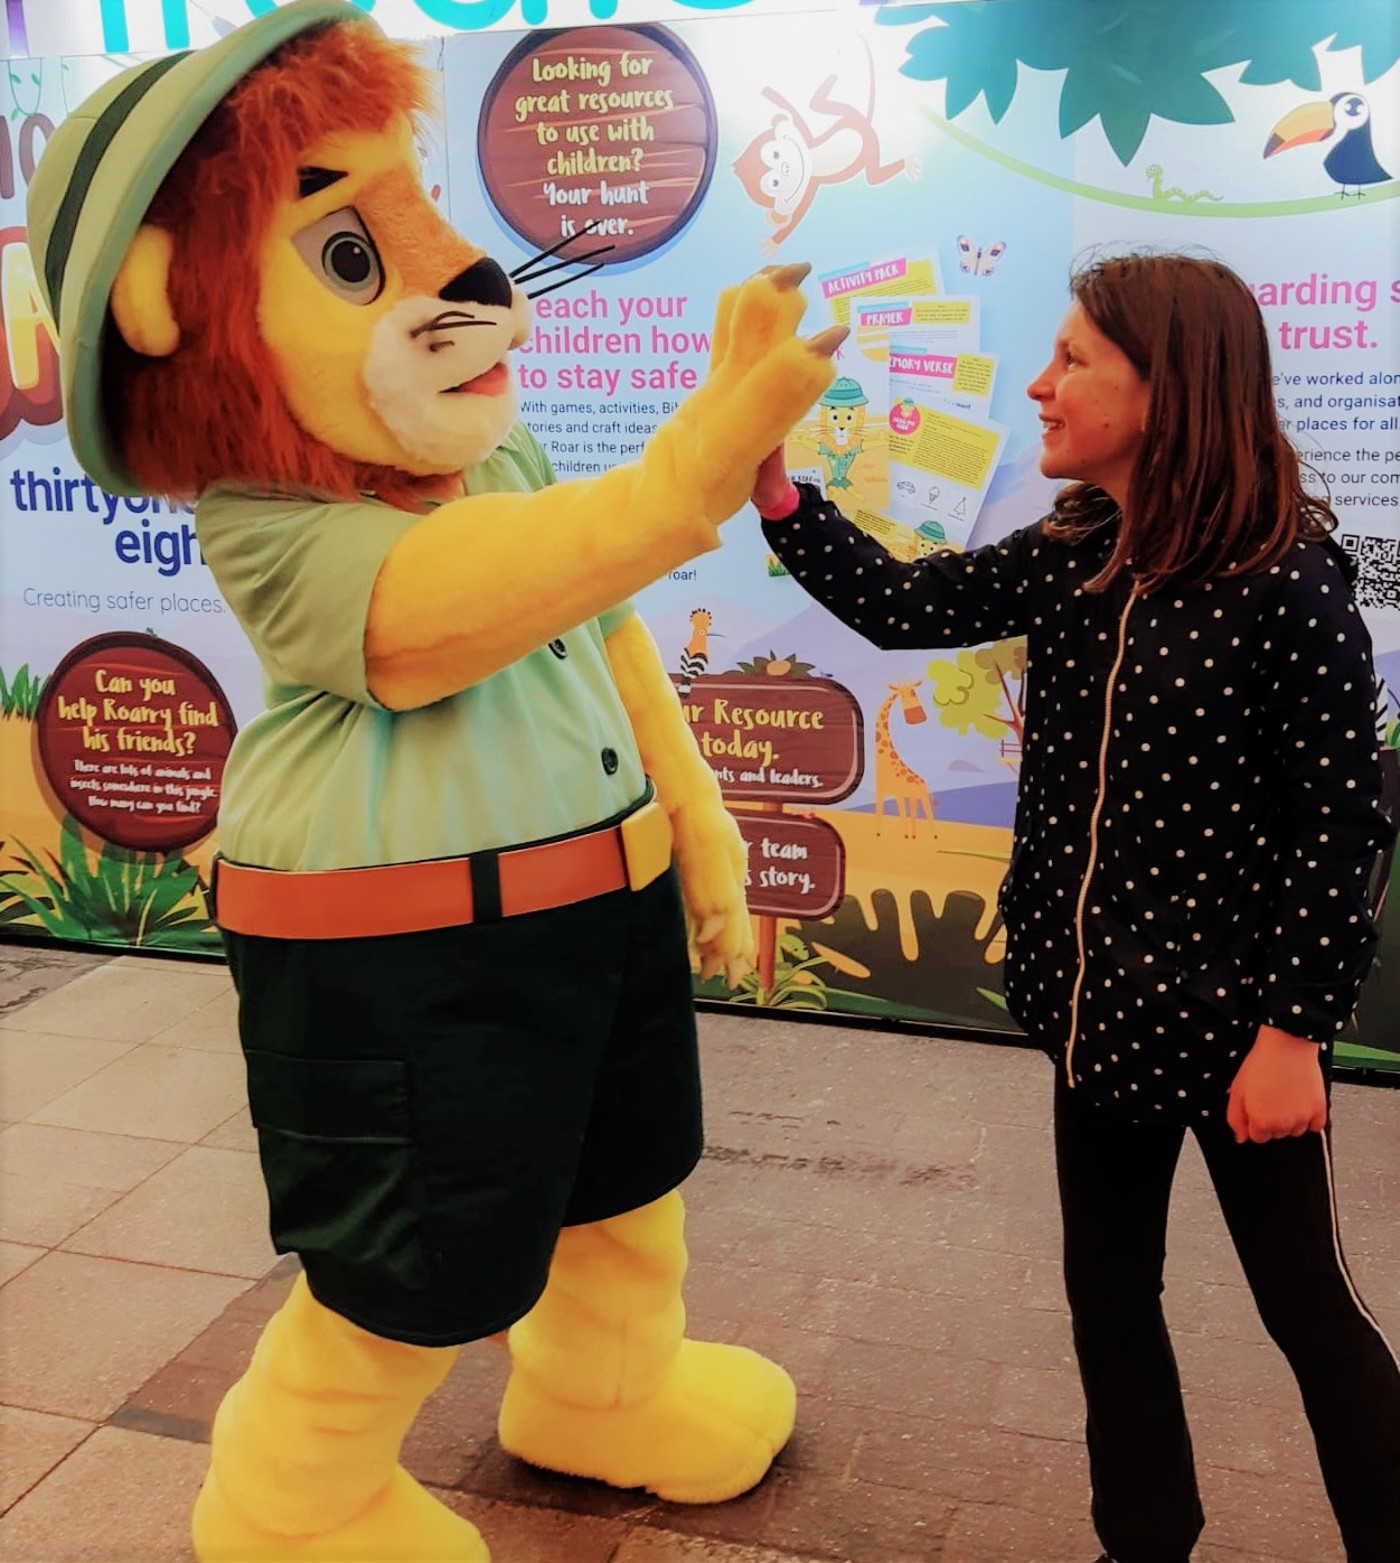 Roarry giving a high five to a girl